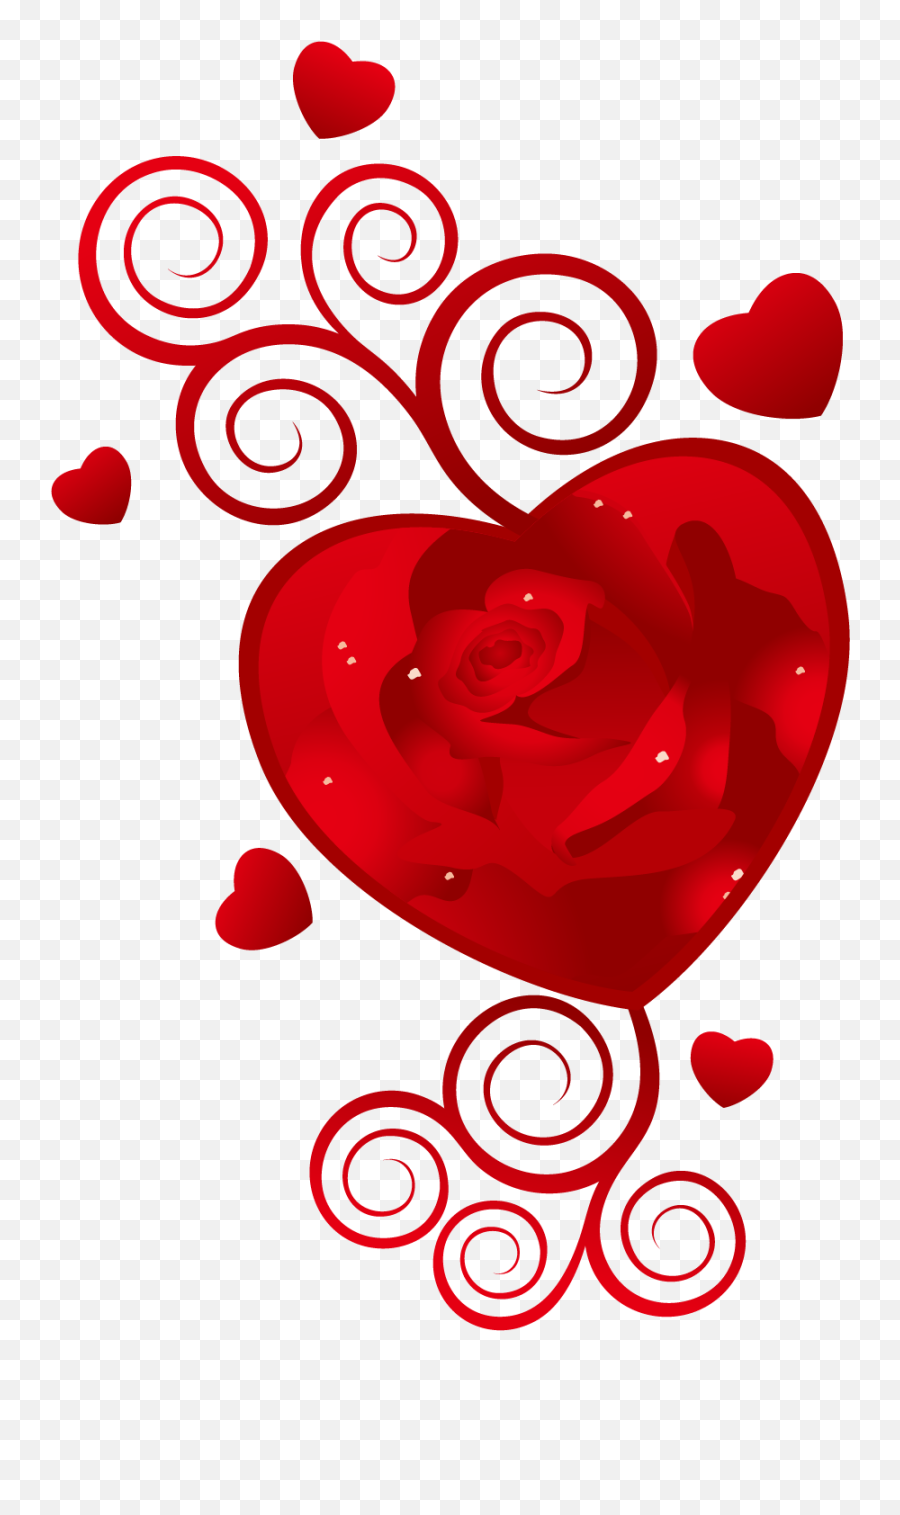 Download Heart February 14 Wish Valentines Vector Rose - Good Morning Happy Valentine Day 2020 Png,Rose Heart Png